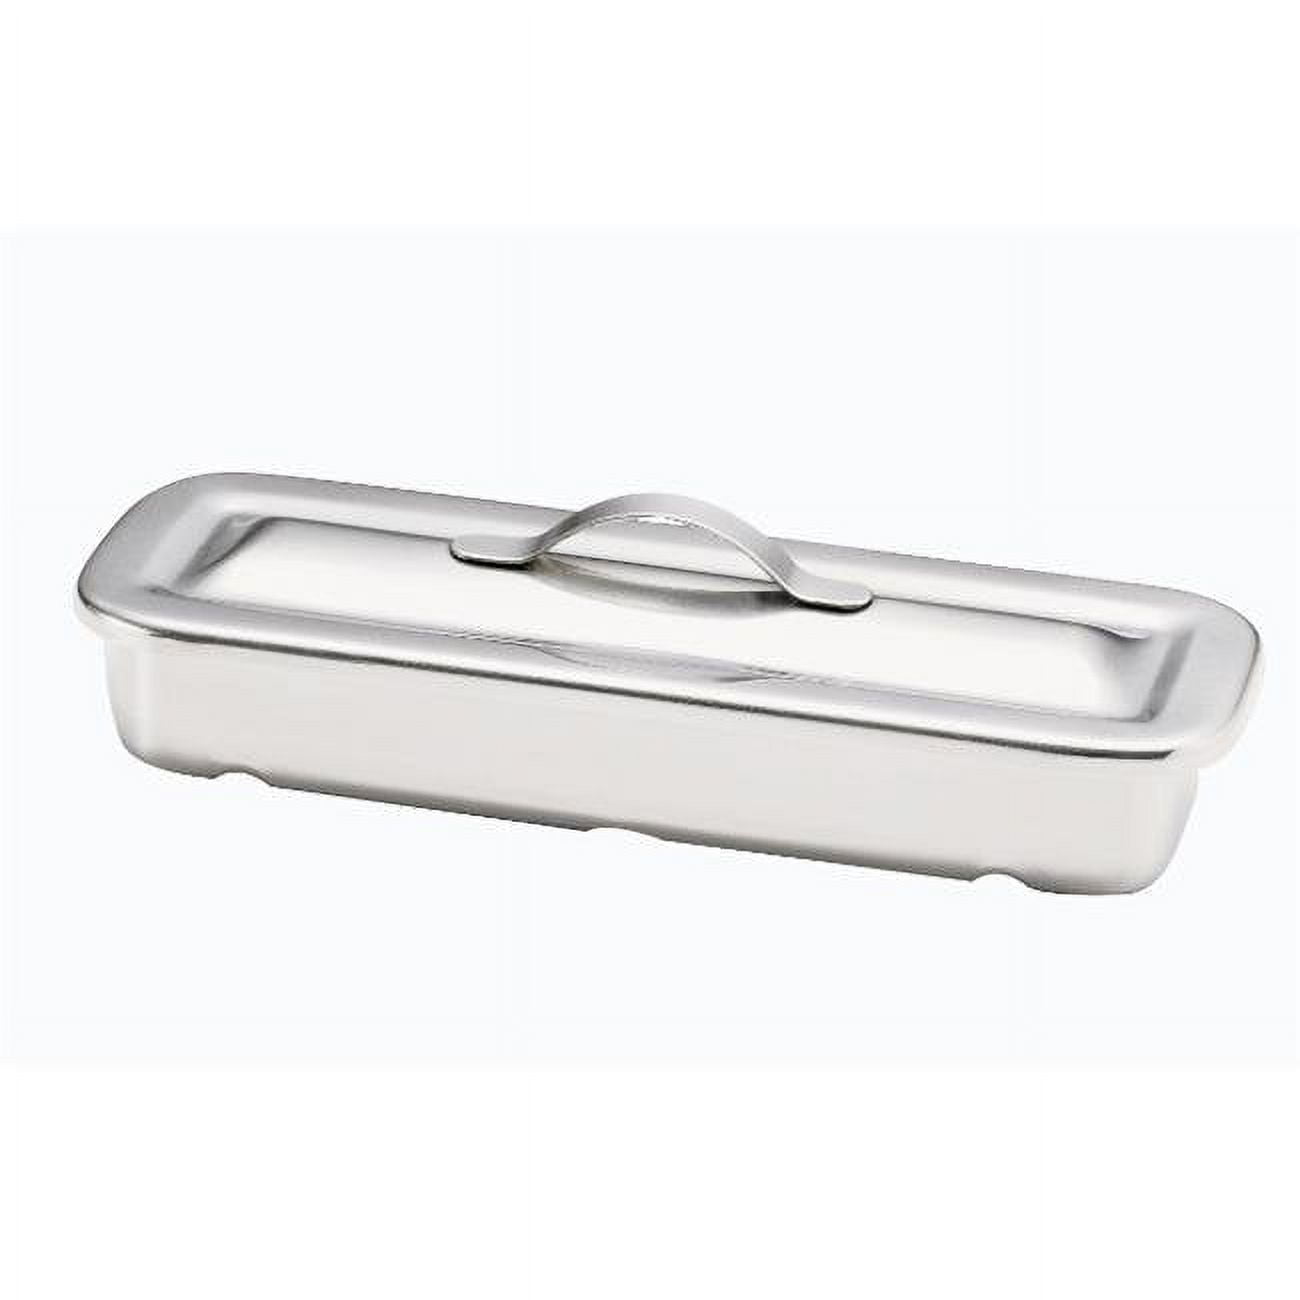 4257 17 X 4 X 1.125 In. Stainless Steel Instrument Tray With Strap Handle